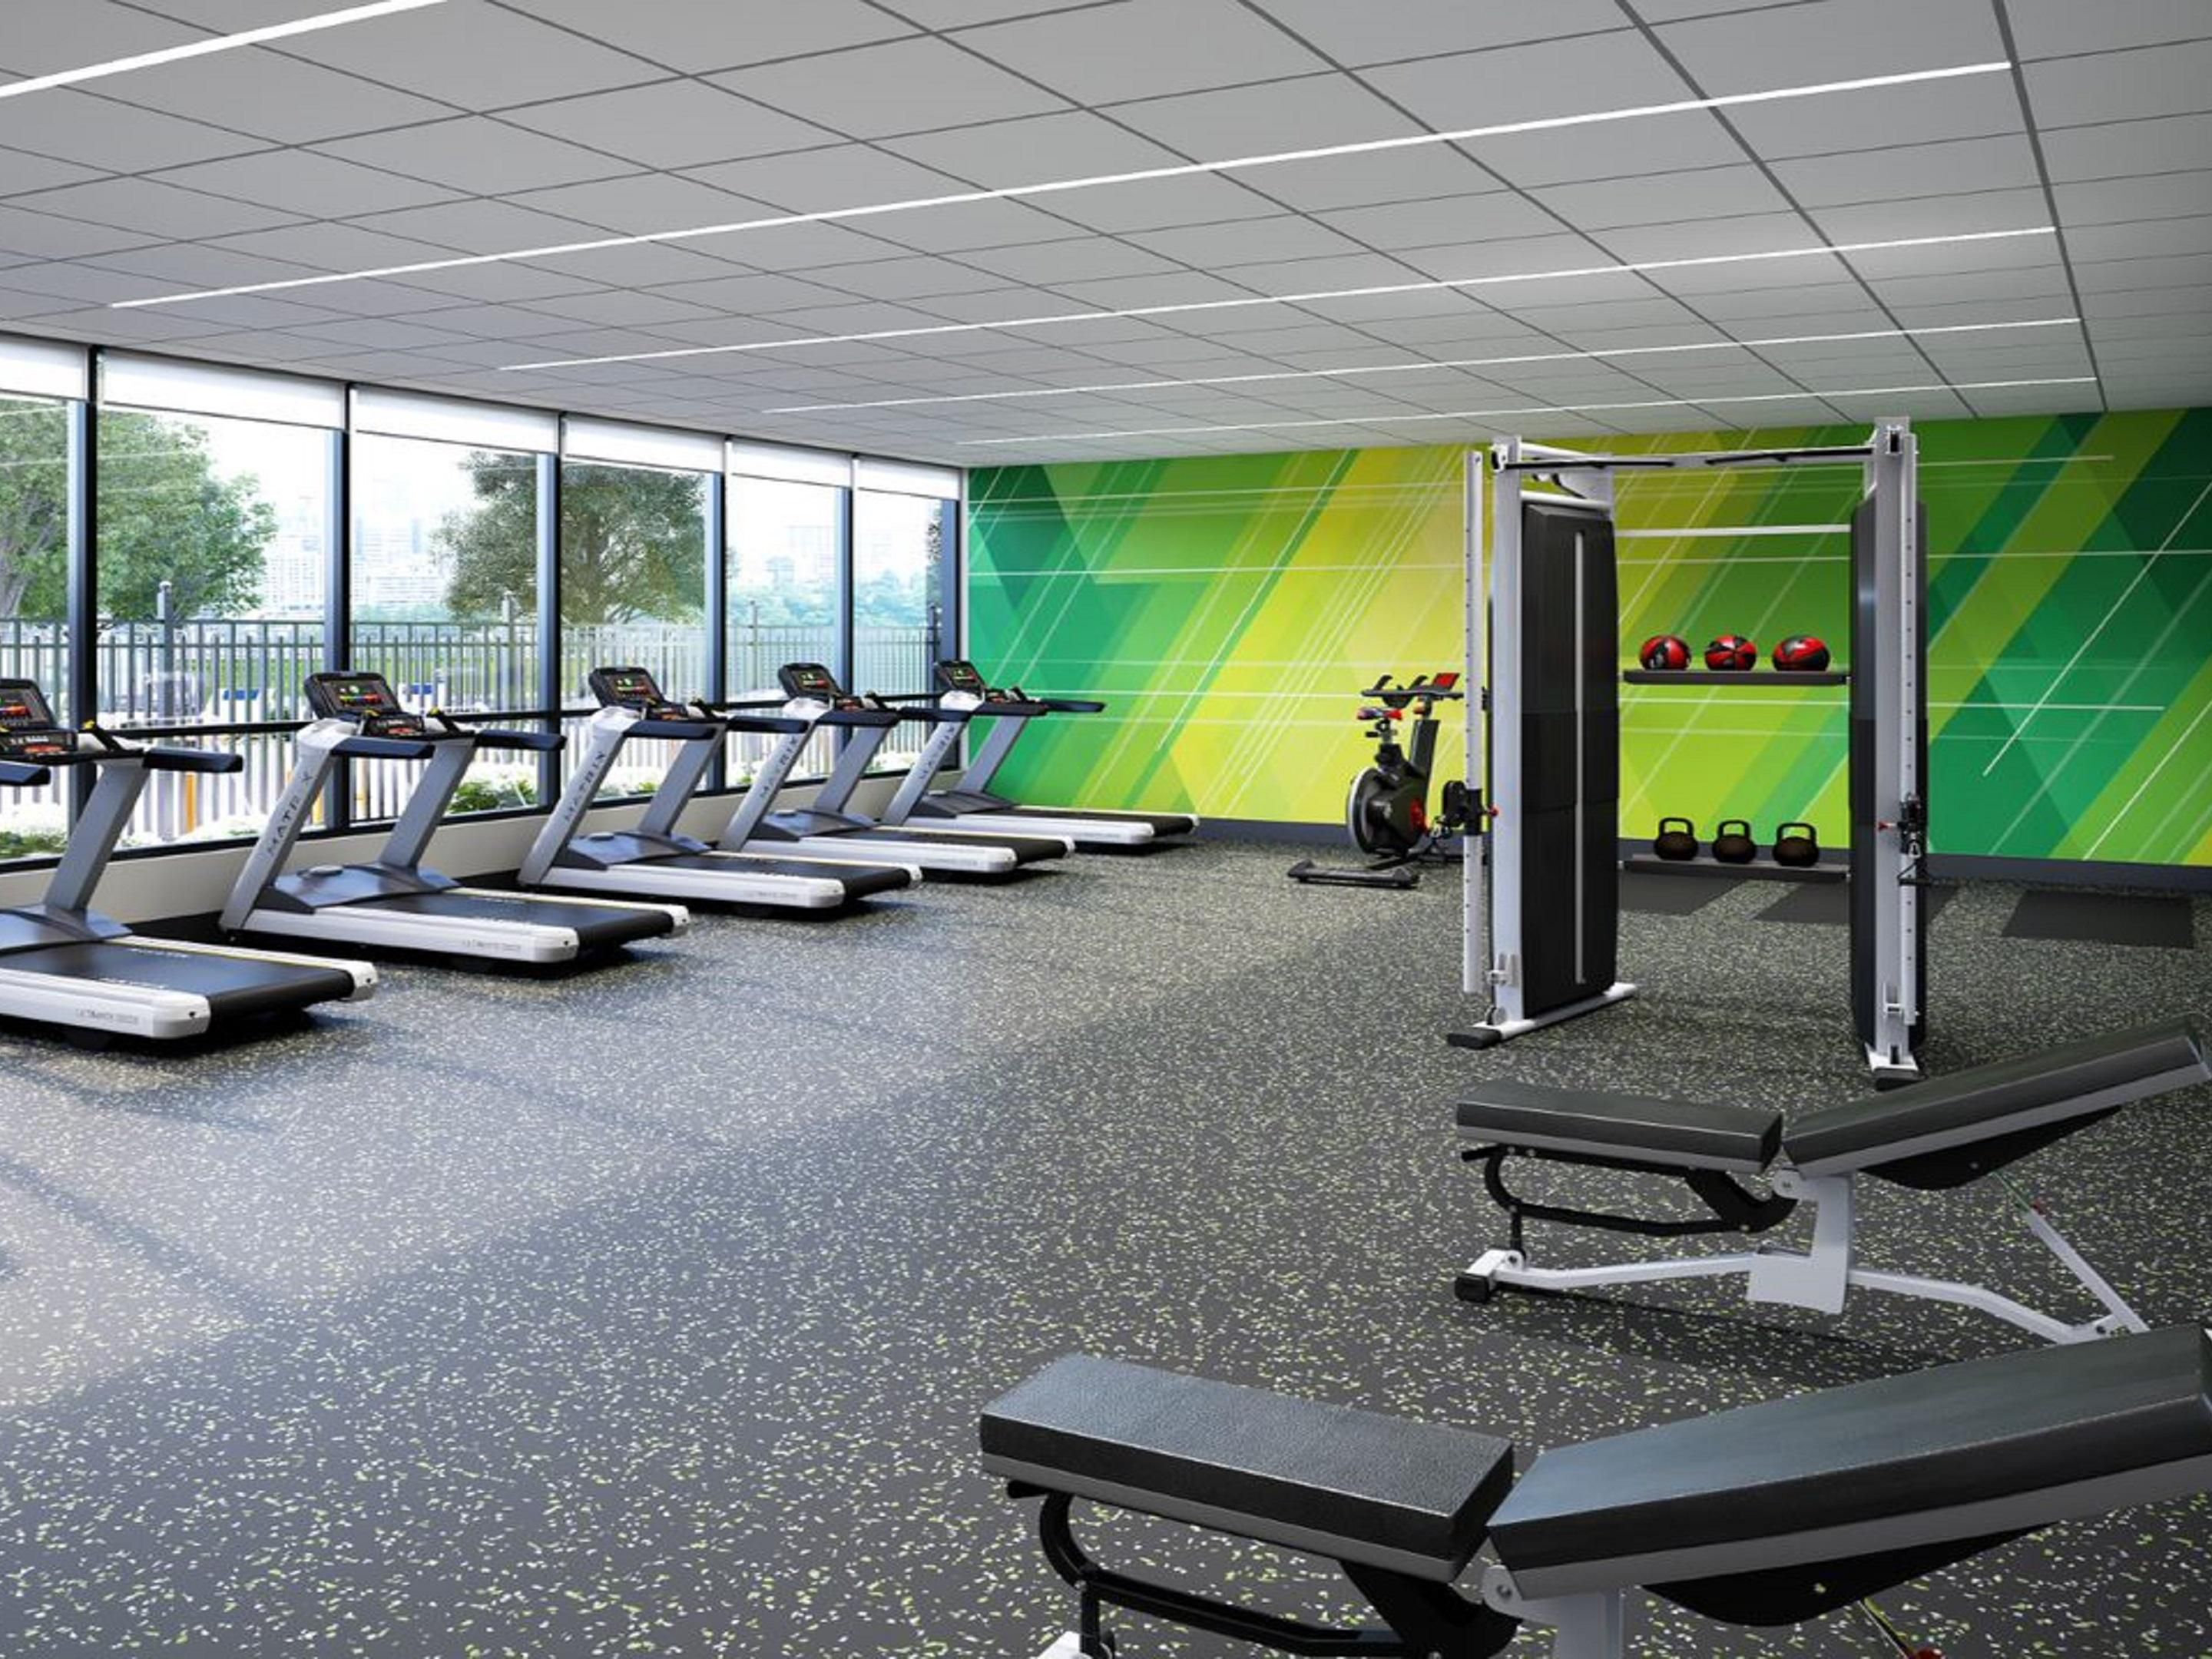 Get your sweat on in our complimentary, fully equipped fitness center- open 6am-10pm daily.